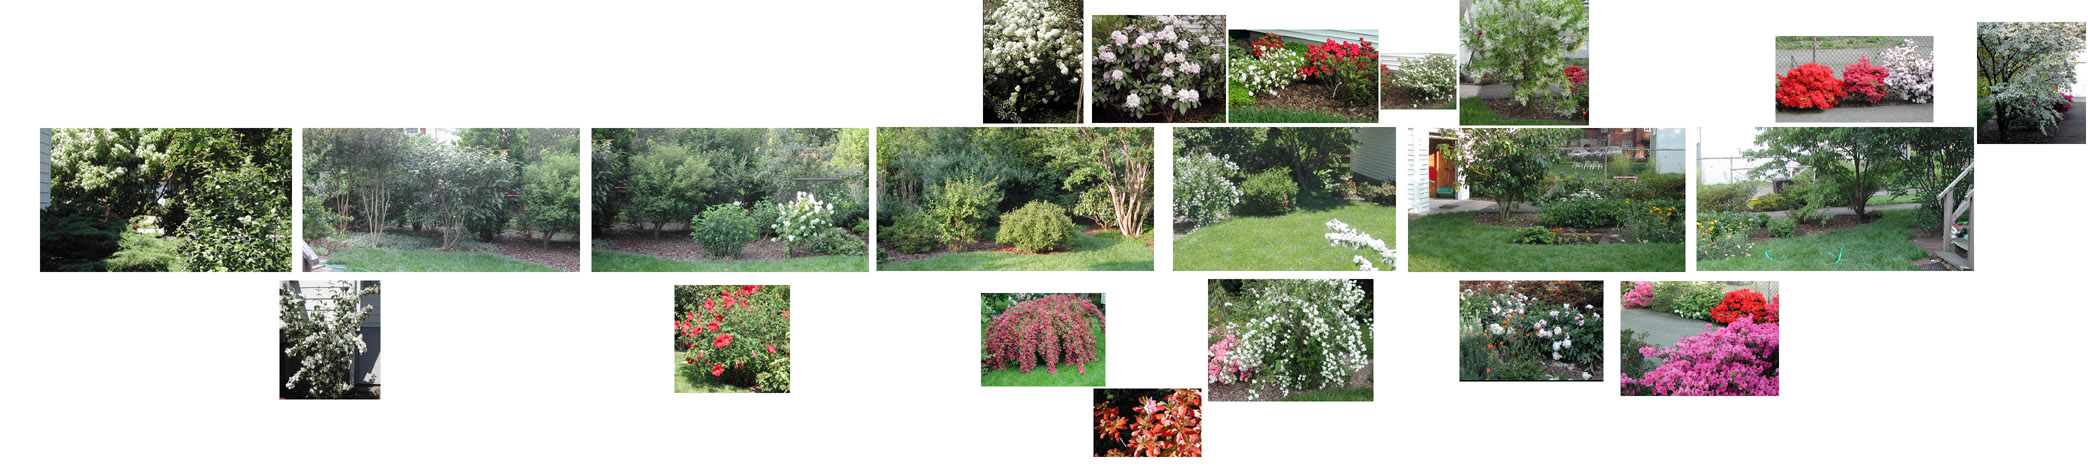 Paul's collage of back garden